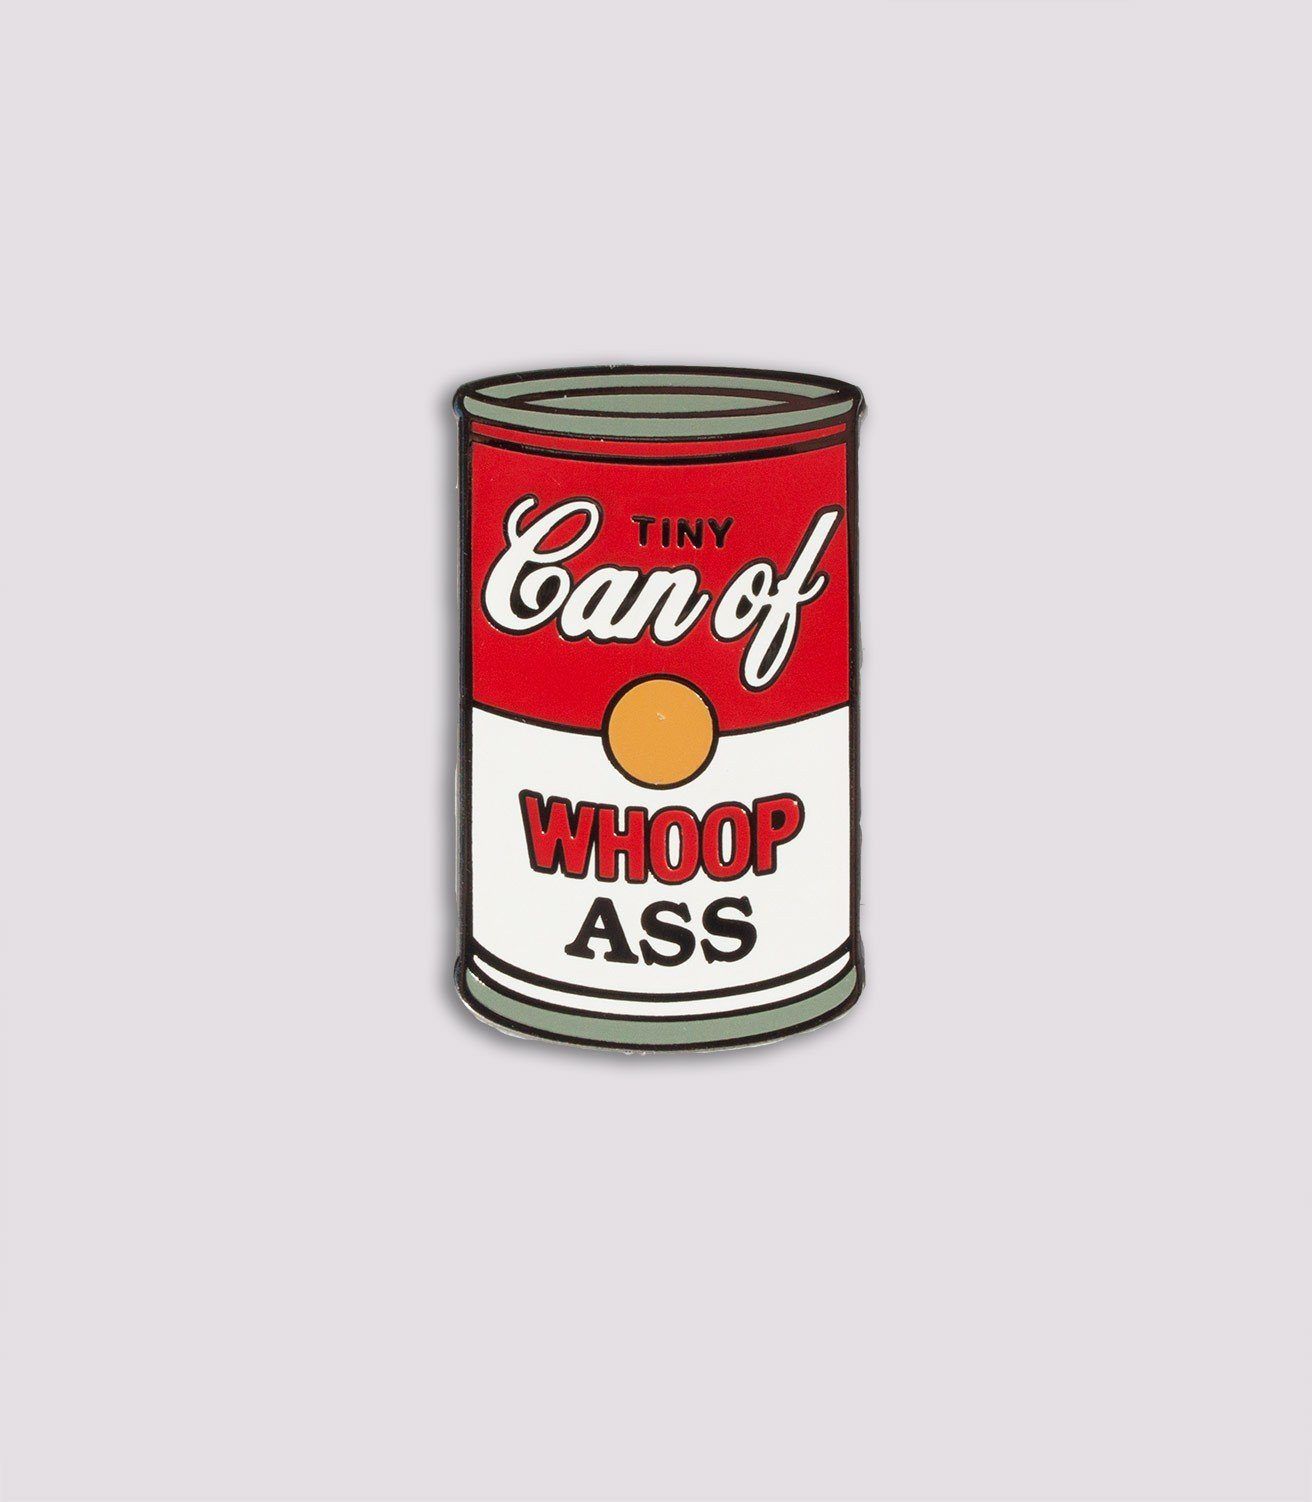 A can of woop ass - Best porno. Comments: 1